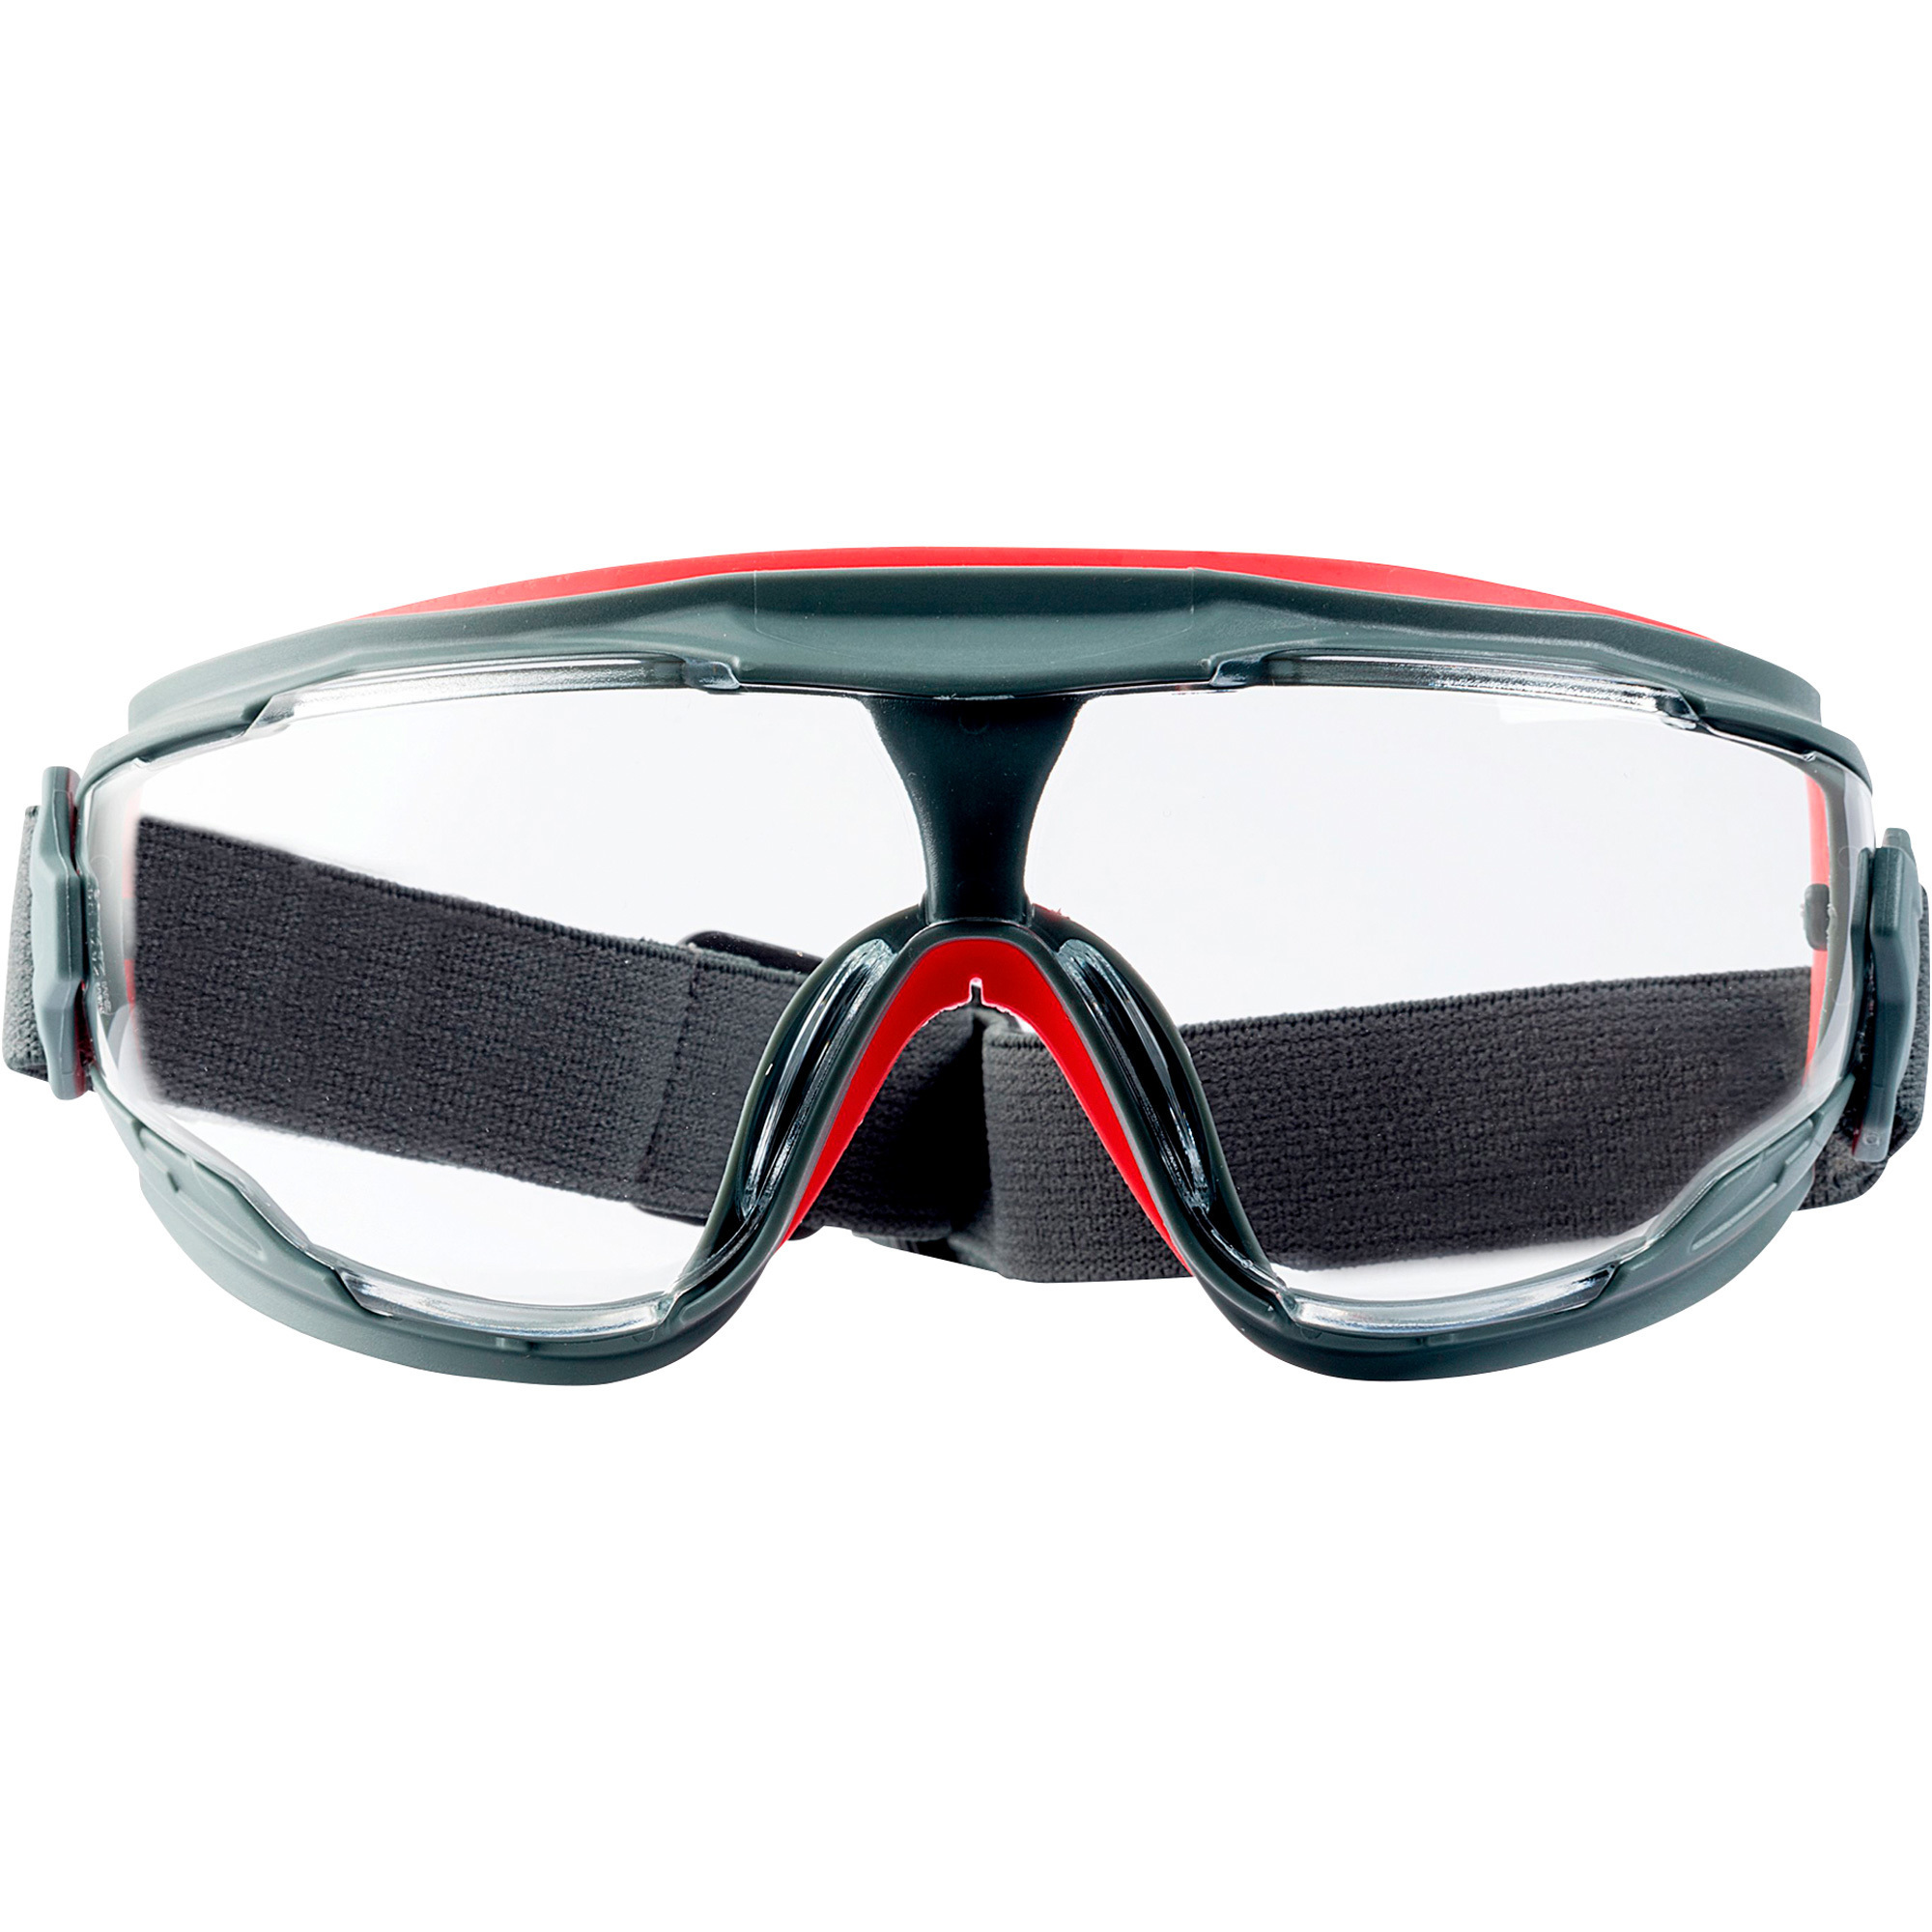 3M Safety Goggles with Scotchgard Protector, Clear Anti-Fog, Anti-Scratch Impact-Resistant Lenses, Gray/Red Frames, Model 47212H1-VDC